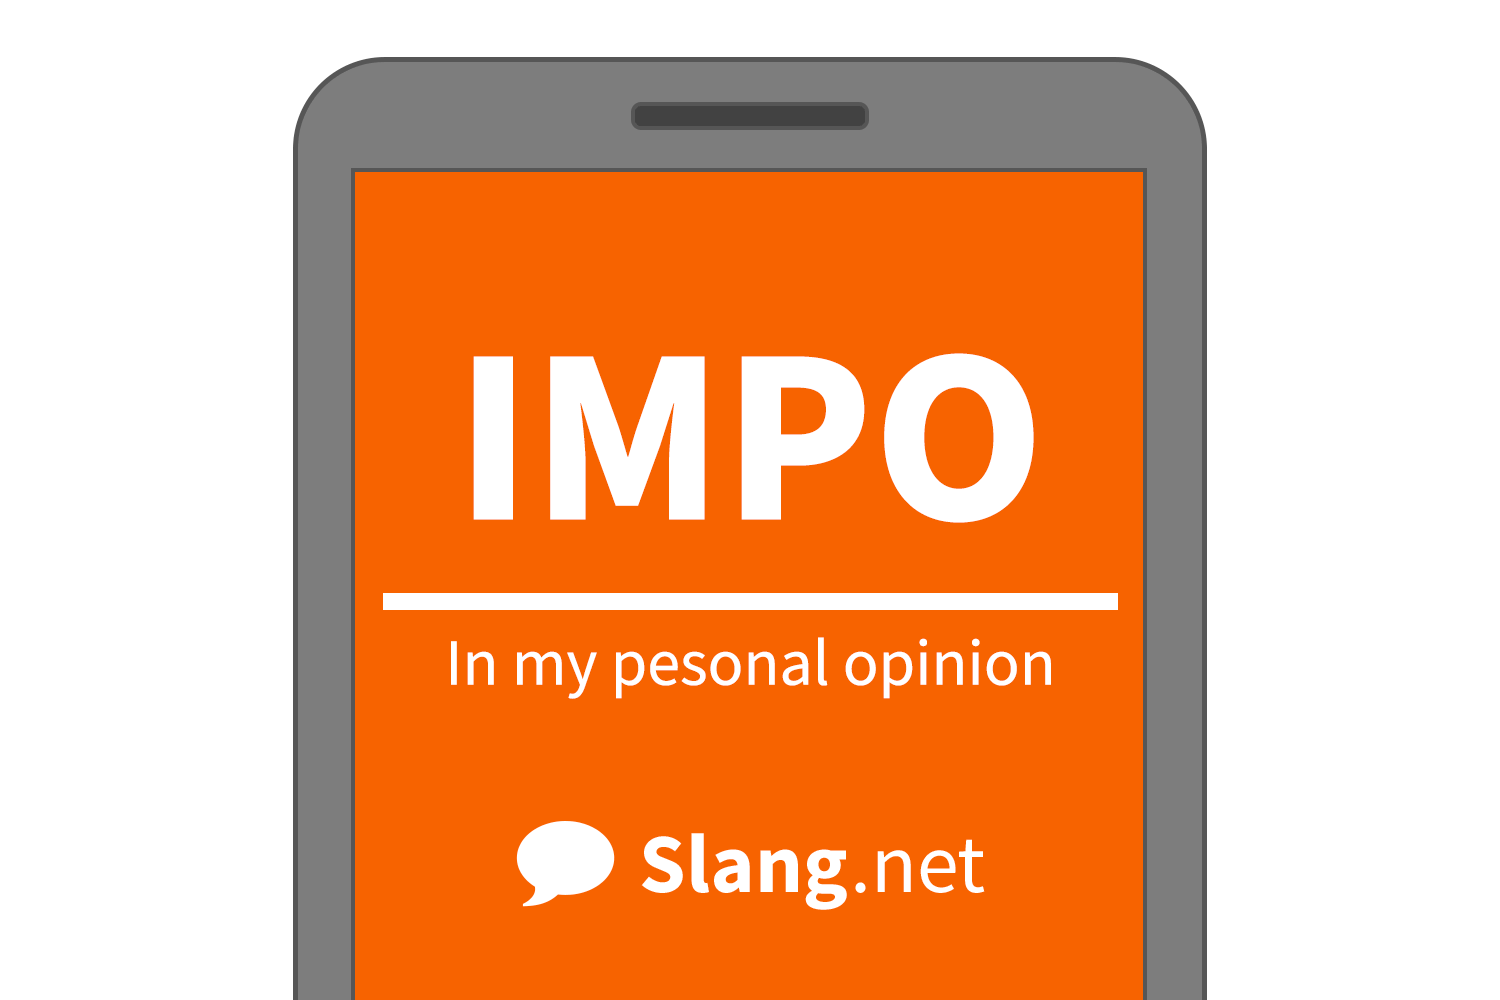 IMPO stands for &quot;in my personal opinion&quot;